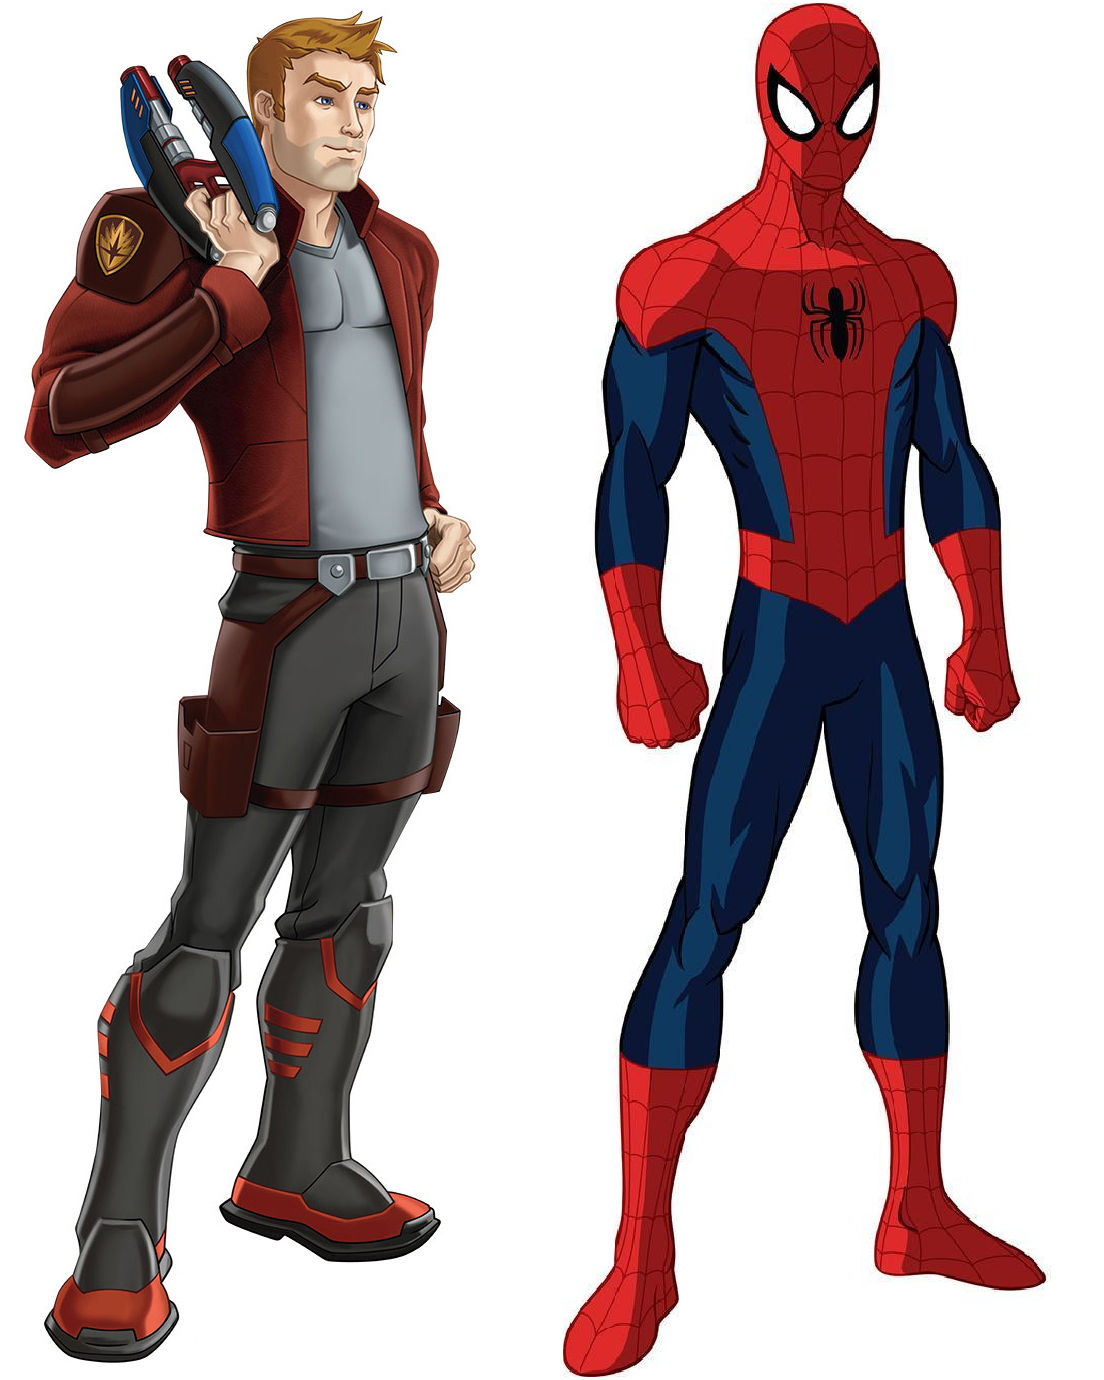 same name Peter Star-Lord and Spider-man by Teaganm on DeviantArt